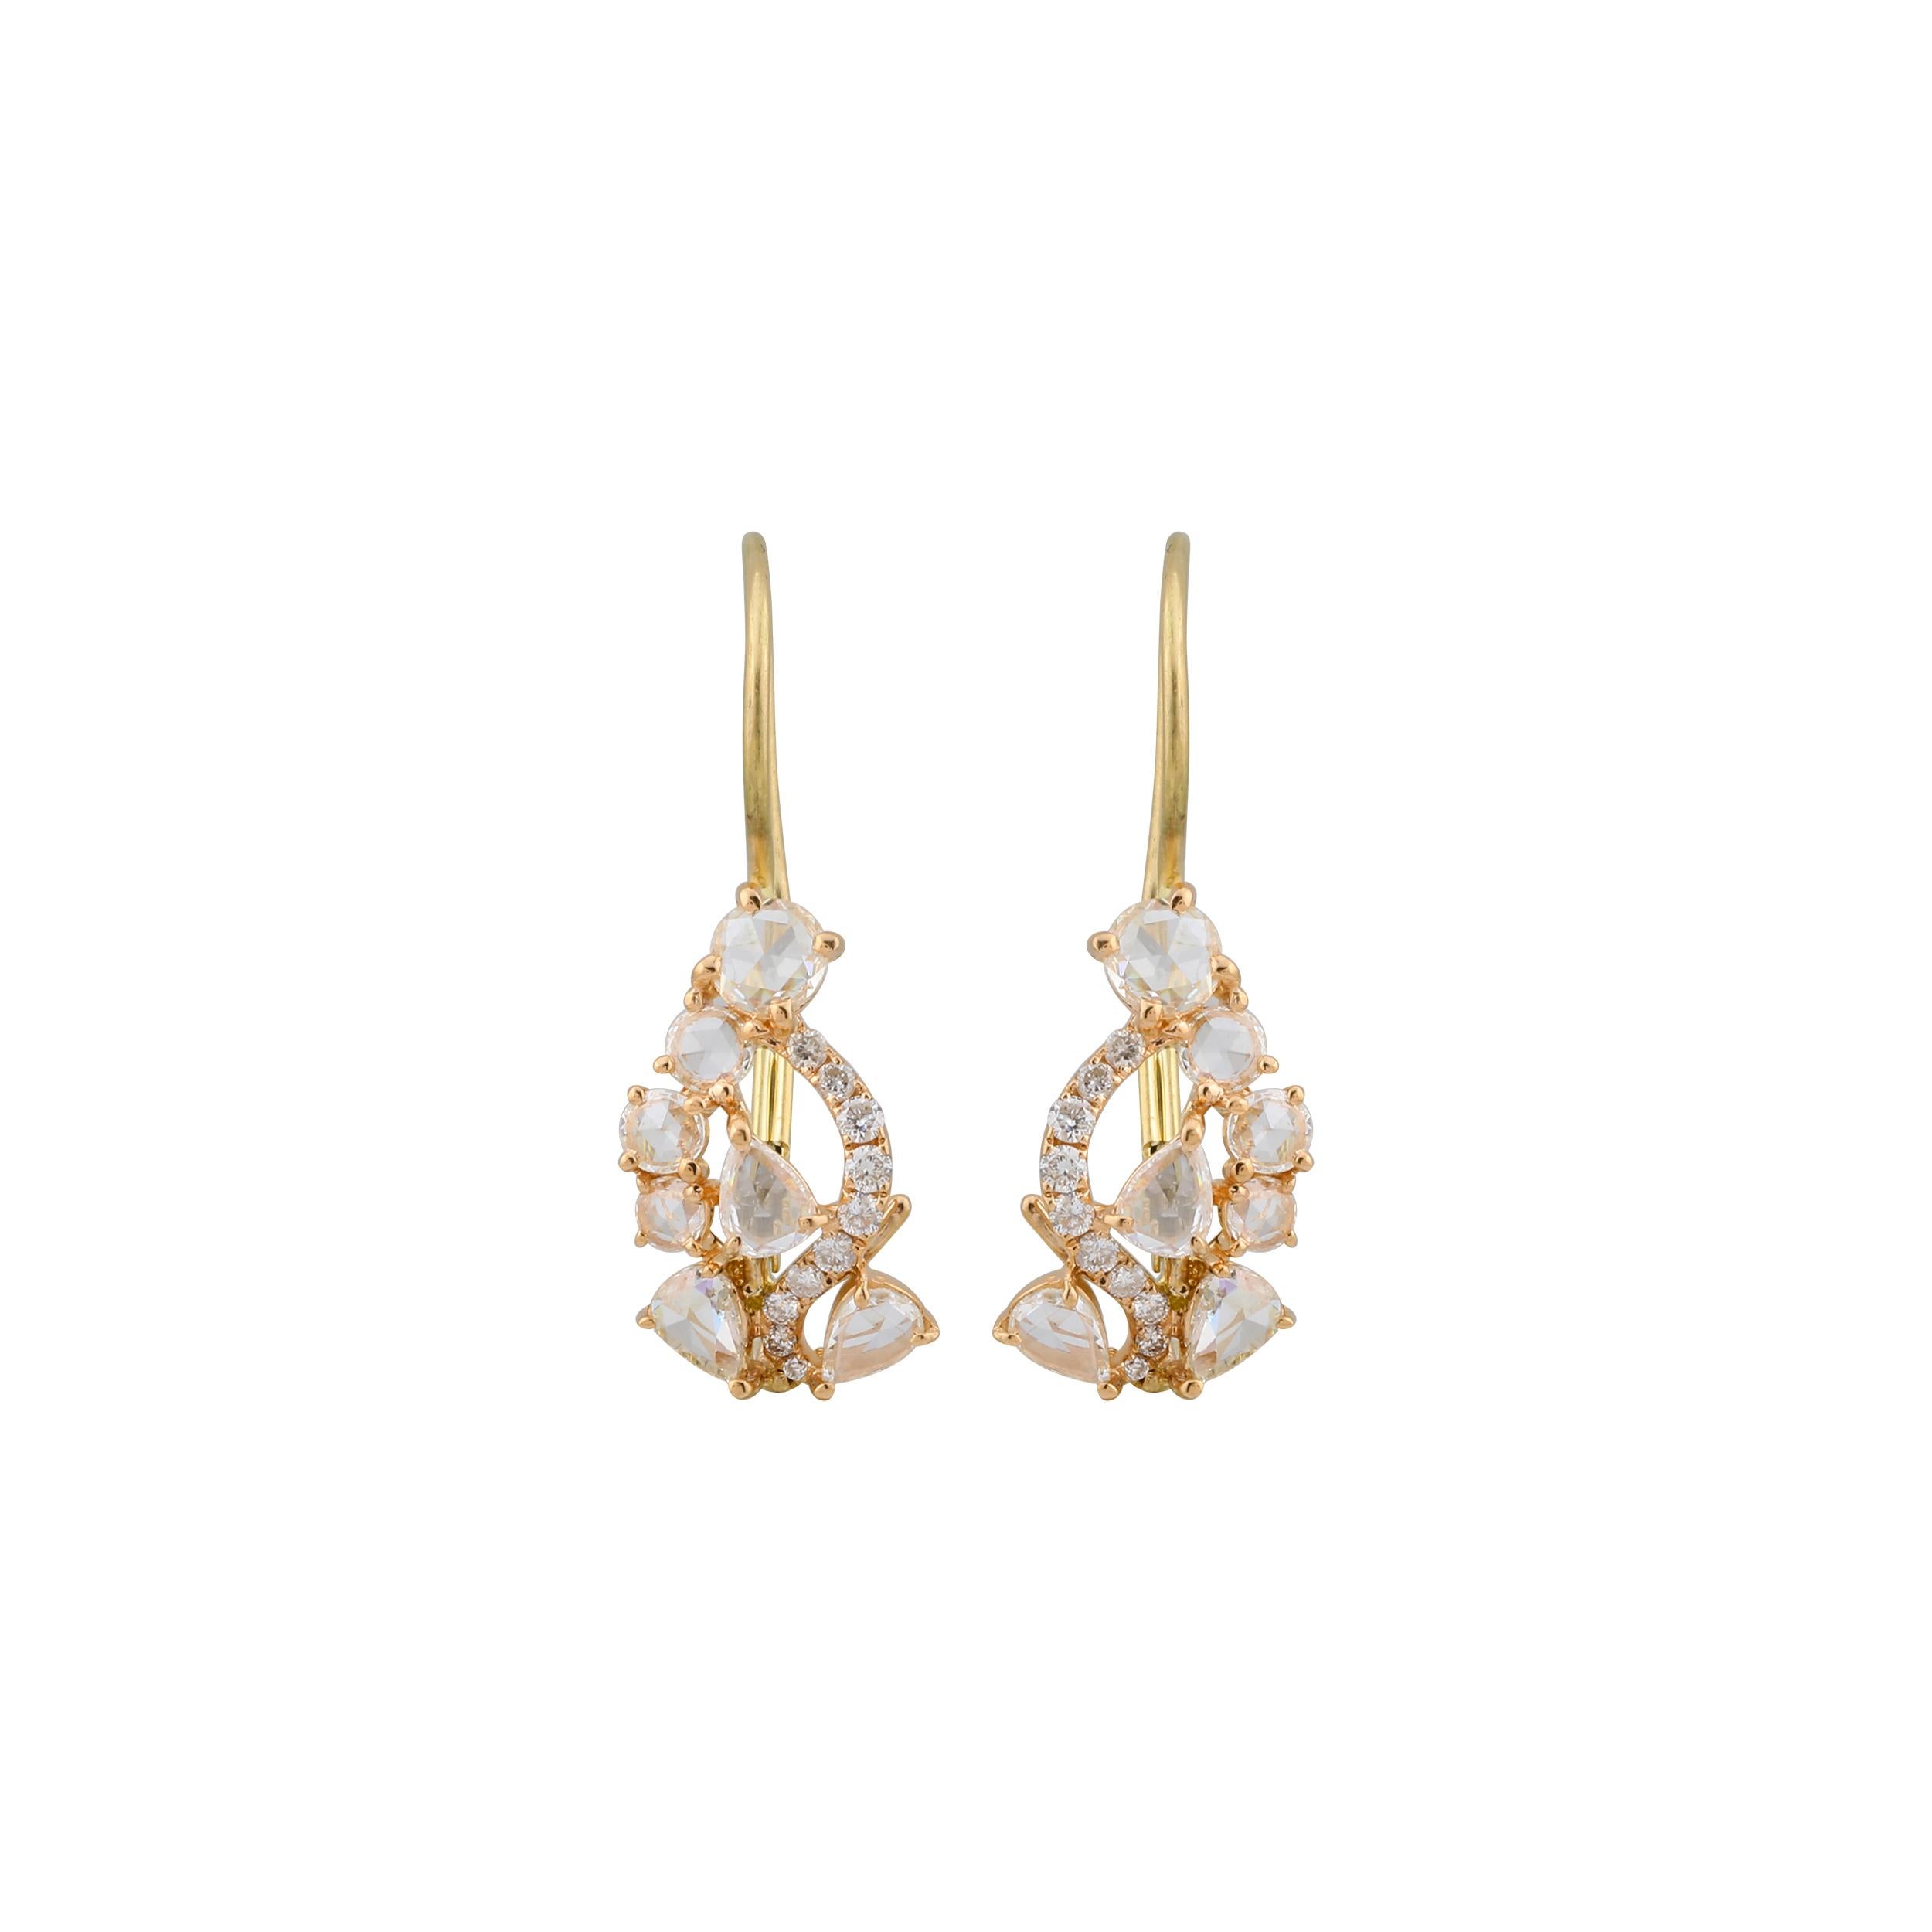 Zoe X blueviewATELIER  29 ct pear shape brown diamond set in platinum removable from champagne and 18kt rose gold earring lever back drop earrings.

Zoe was sold exclusively at the fine jewelry department in Barneys New York across the country from